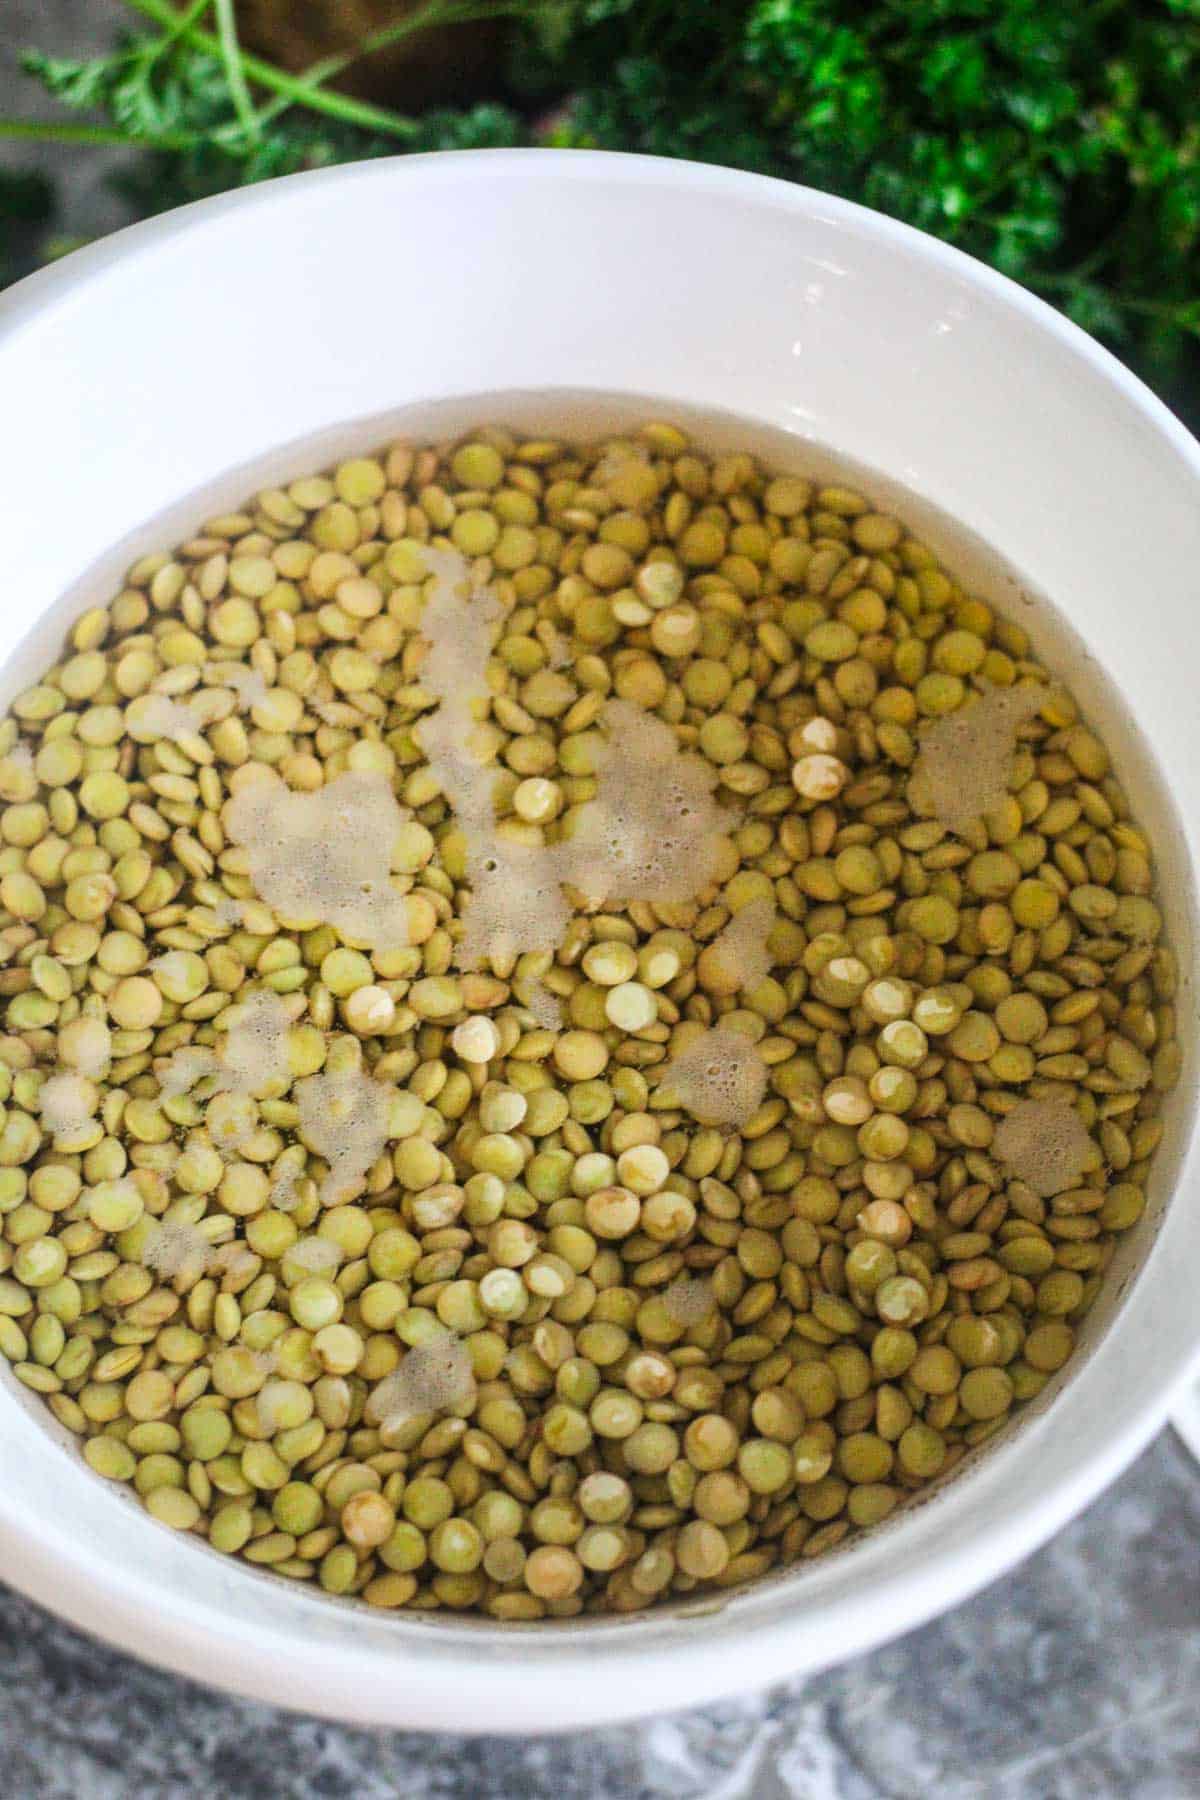 Lentils soaking in a bowl of water.